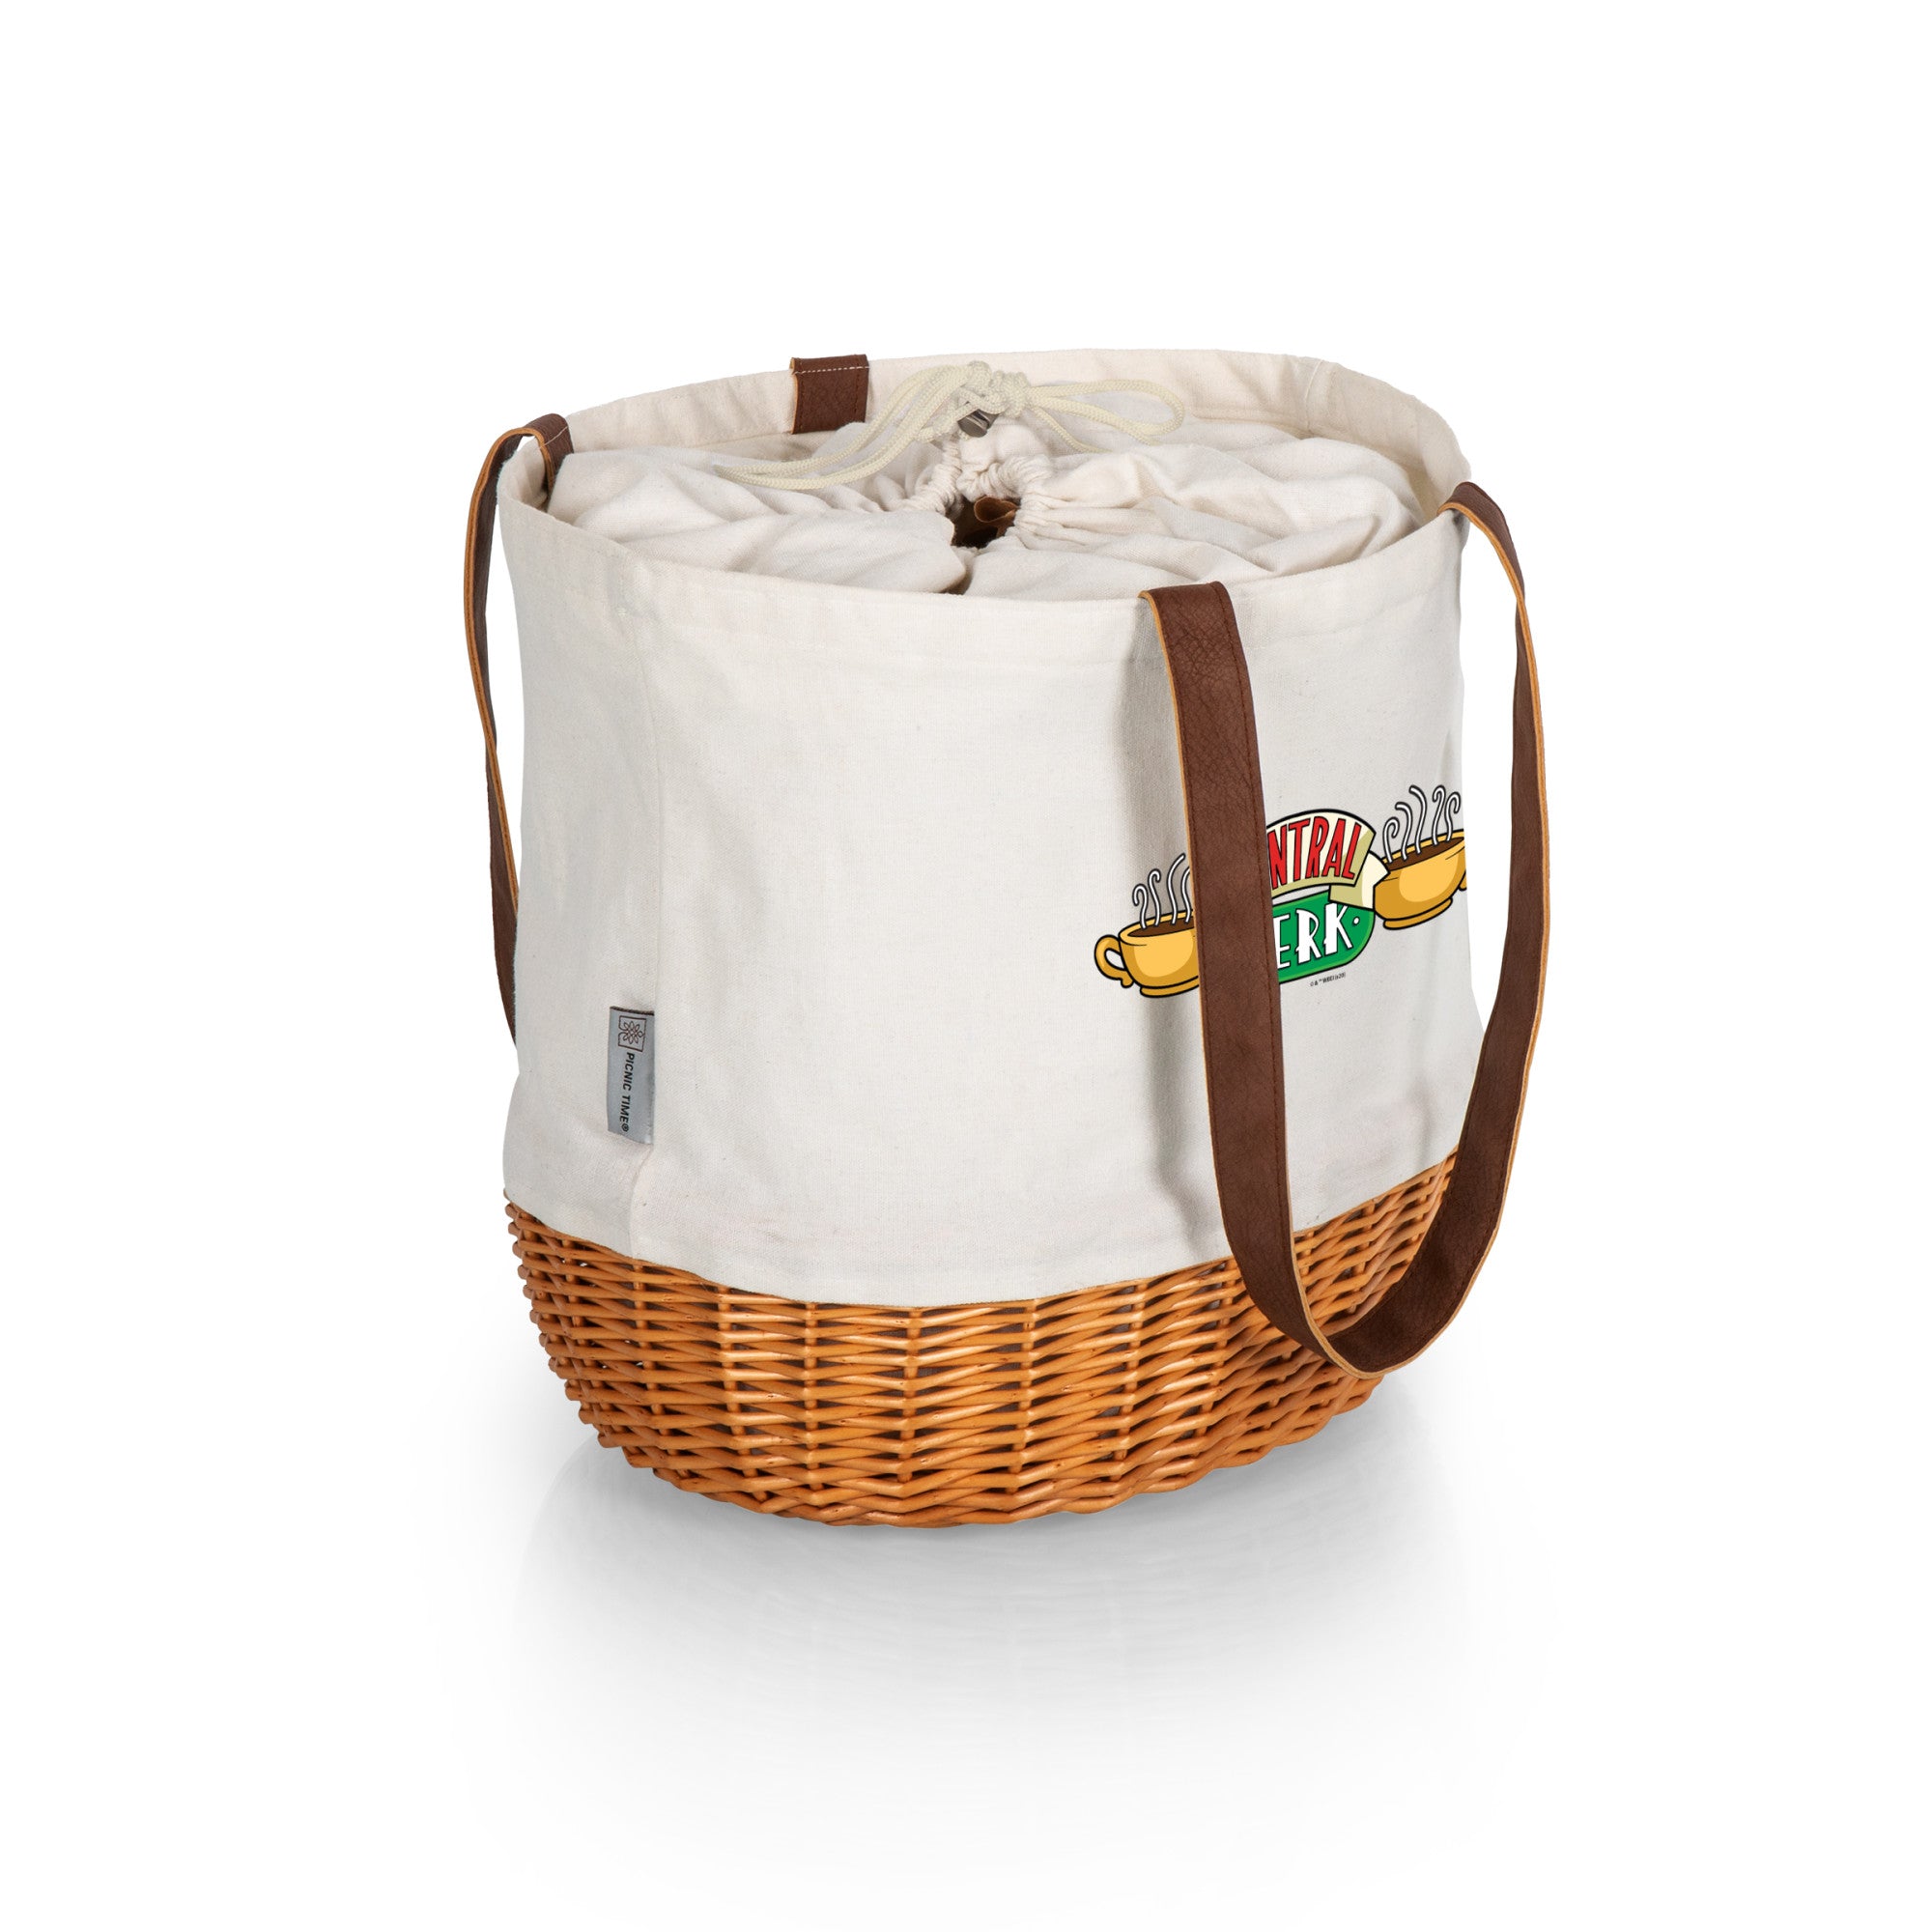 Friends Central Perk - Coronado Canvas and Willow Basket Tote